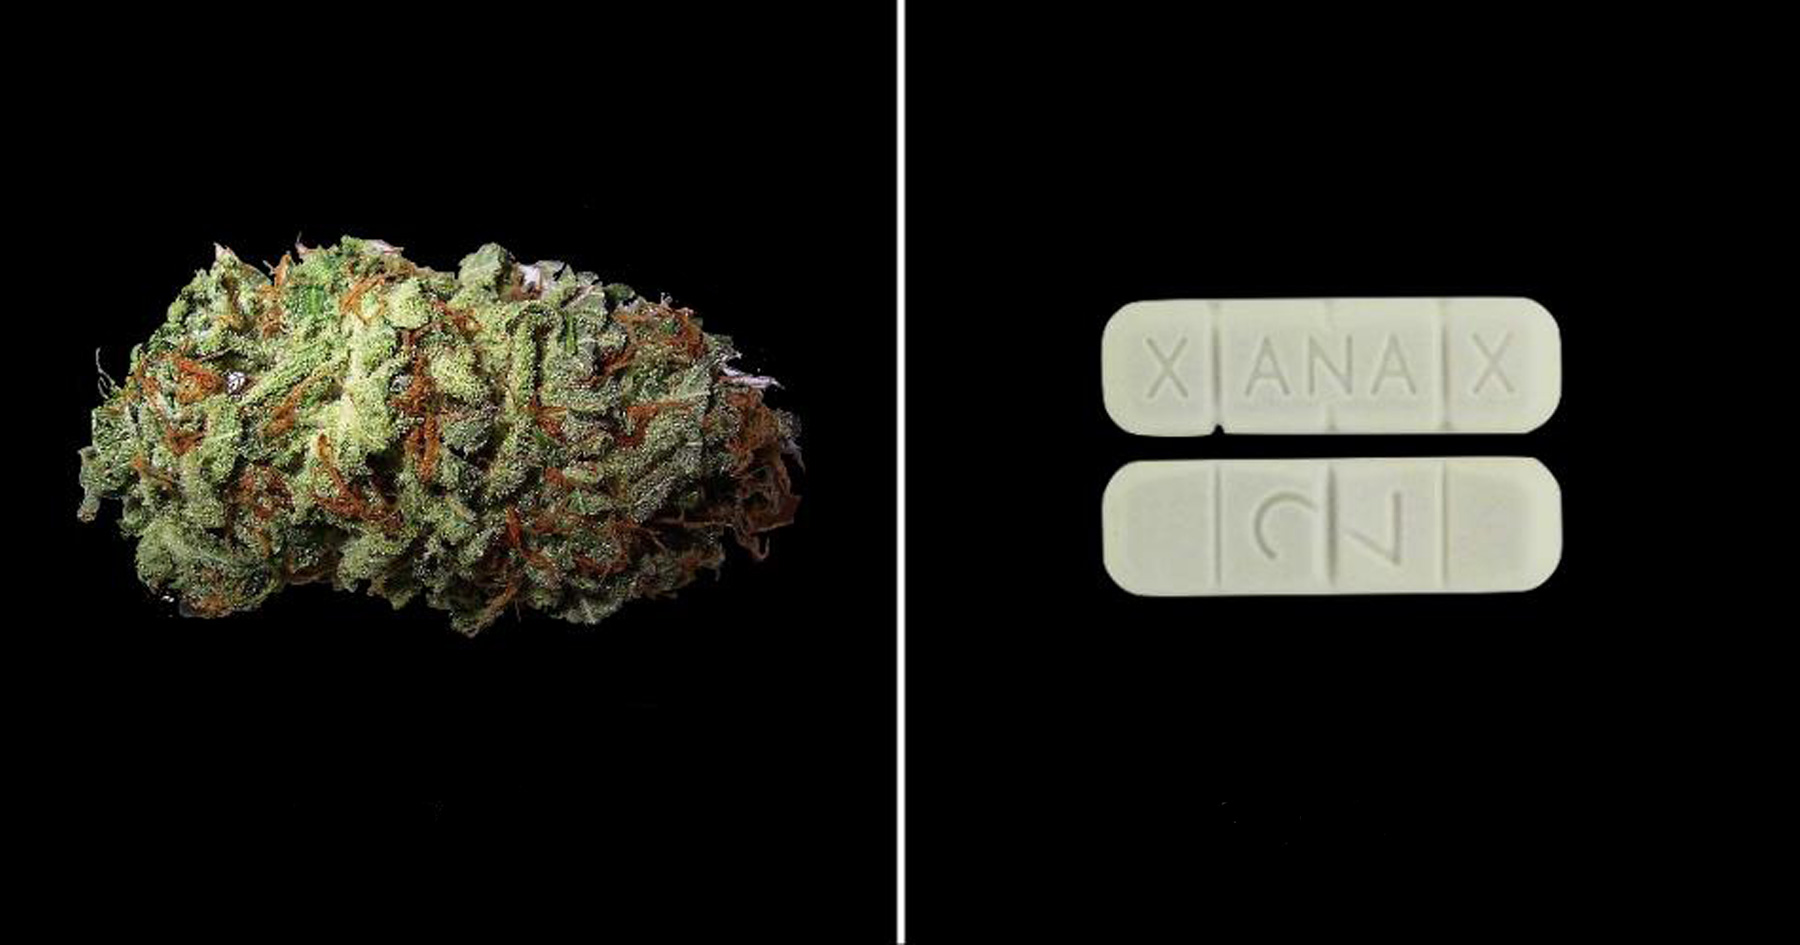 Drug to replace xanax